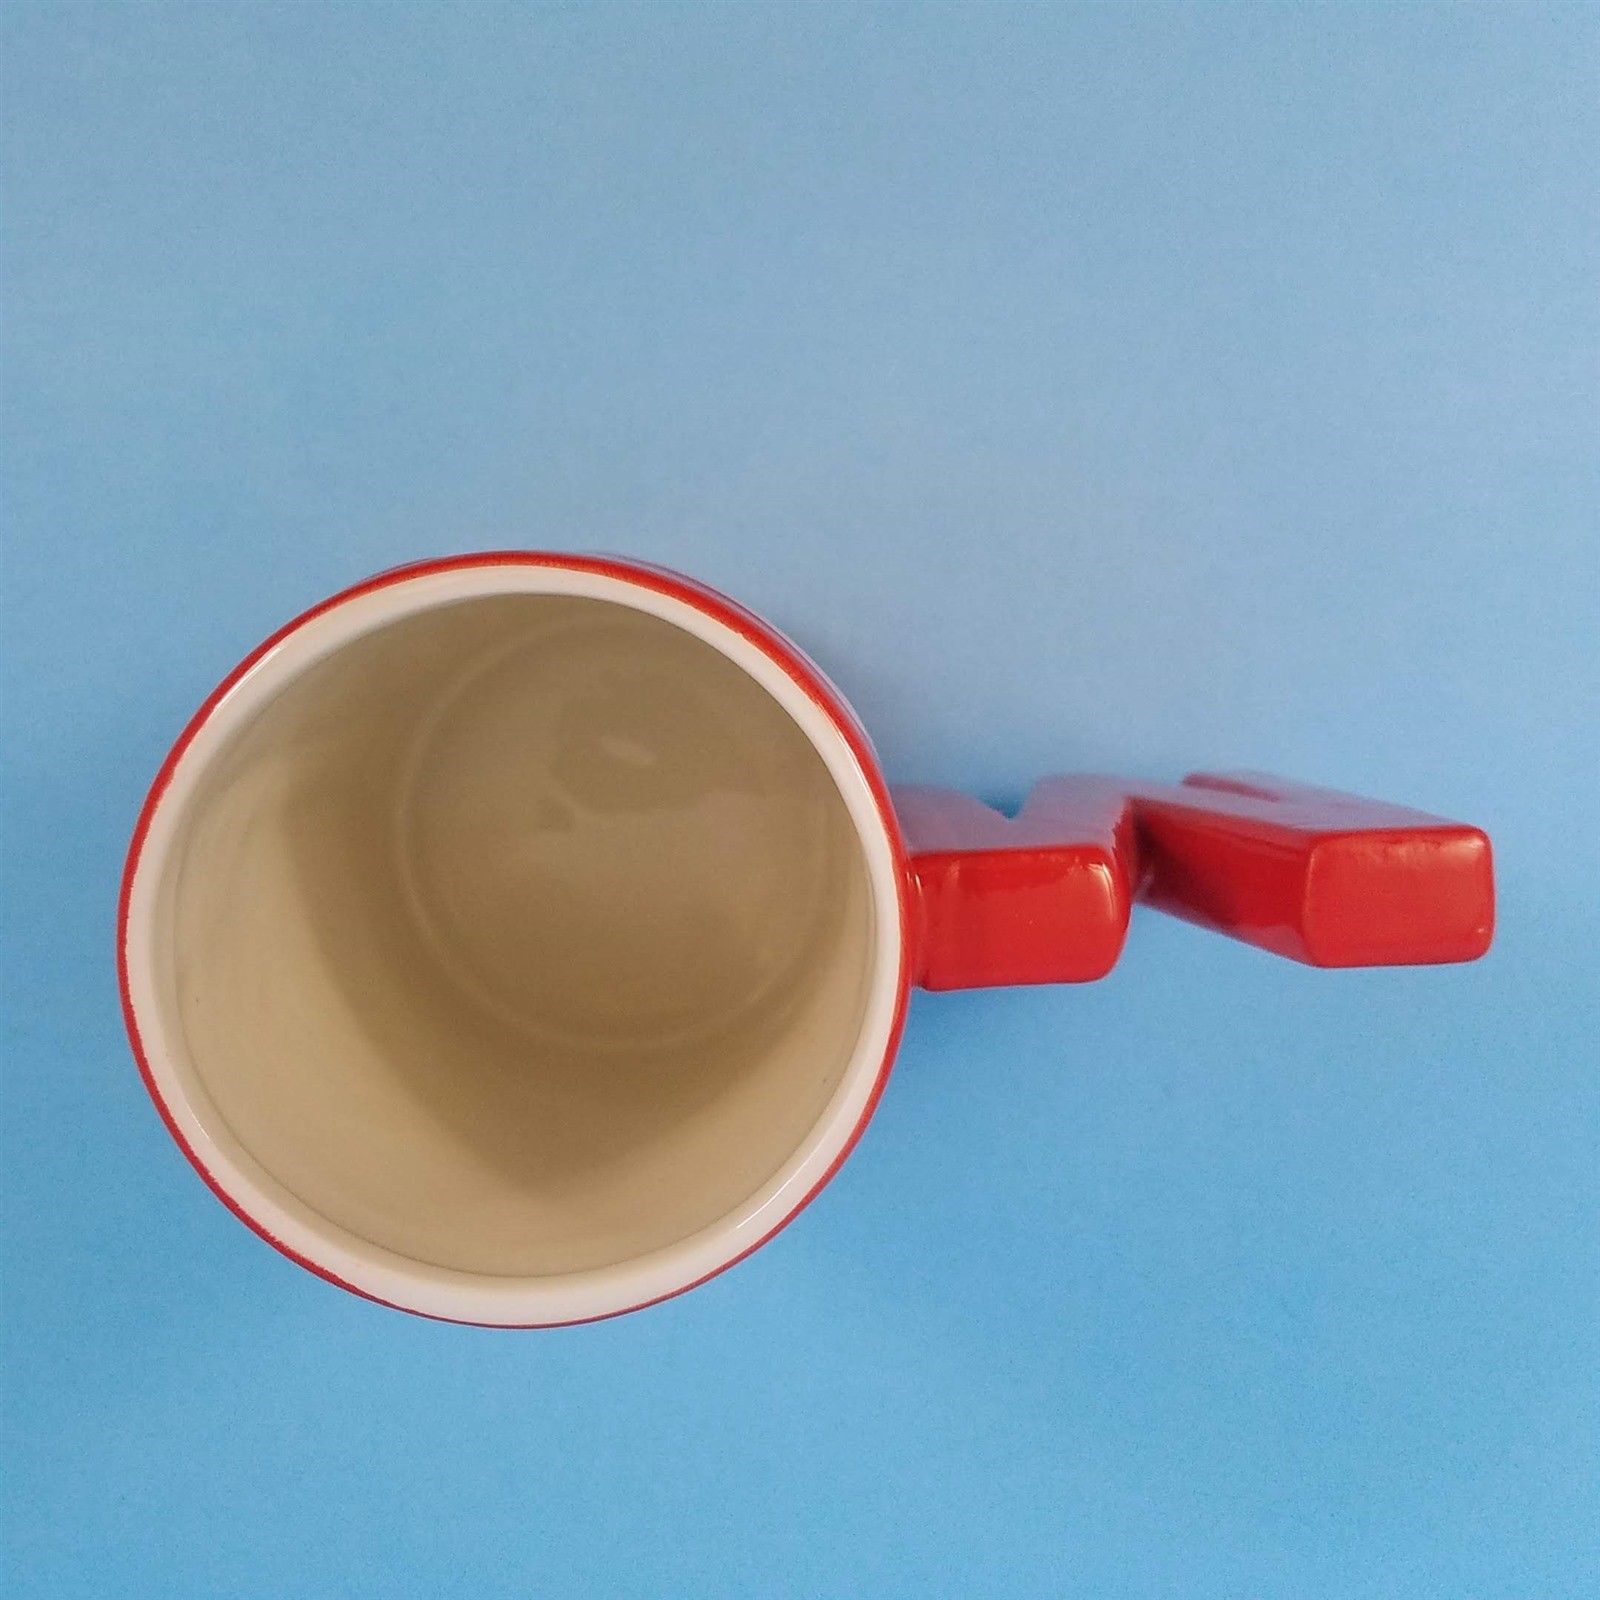 This MOM in Red and White Beverage Coffee Cup Large Mug 20 oz Pen Pencil Holder is made with love by Premier Homegoods! Shop more unique gift ideas today with Spots Initiatives, the best way to support creators.